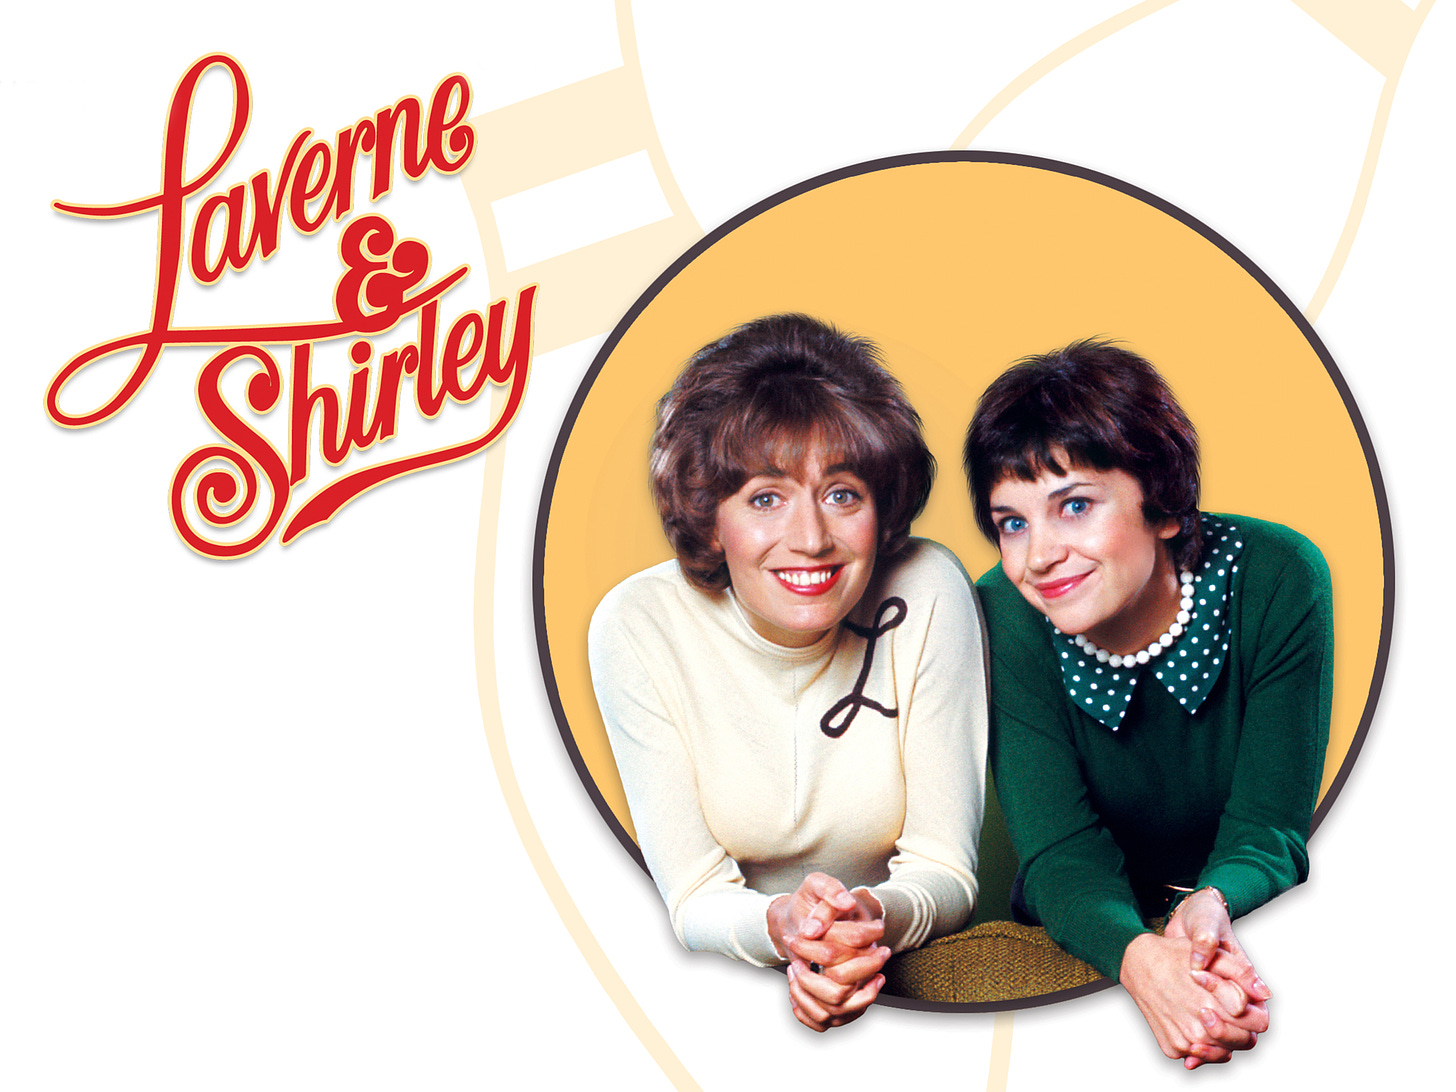 Laverne and Shirley, in a circle with the show logo in the corner, both smiling, though Laverrne's smile is a bit strained, maybe?